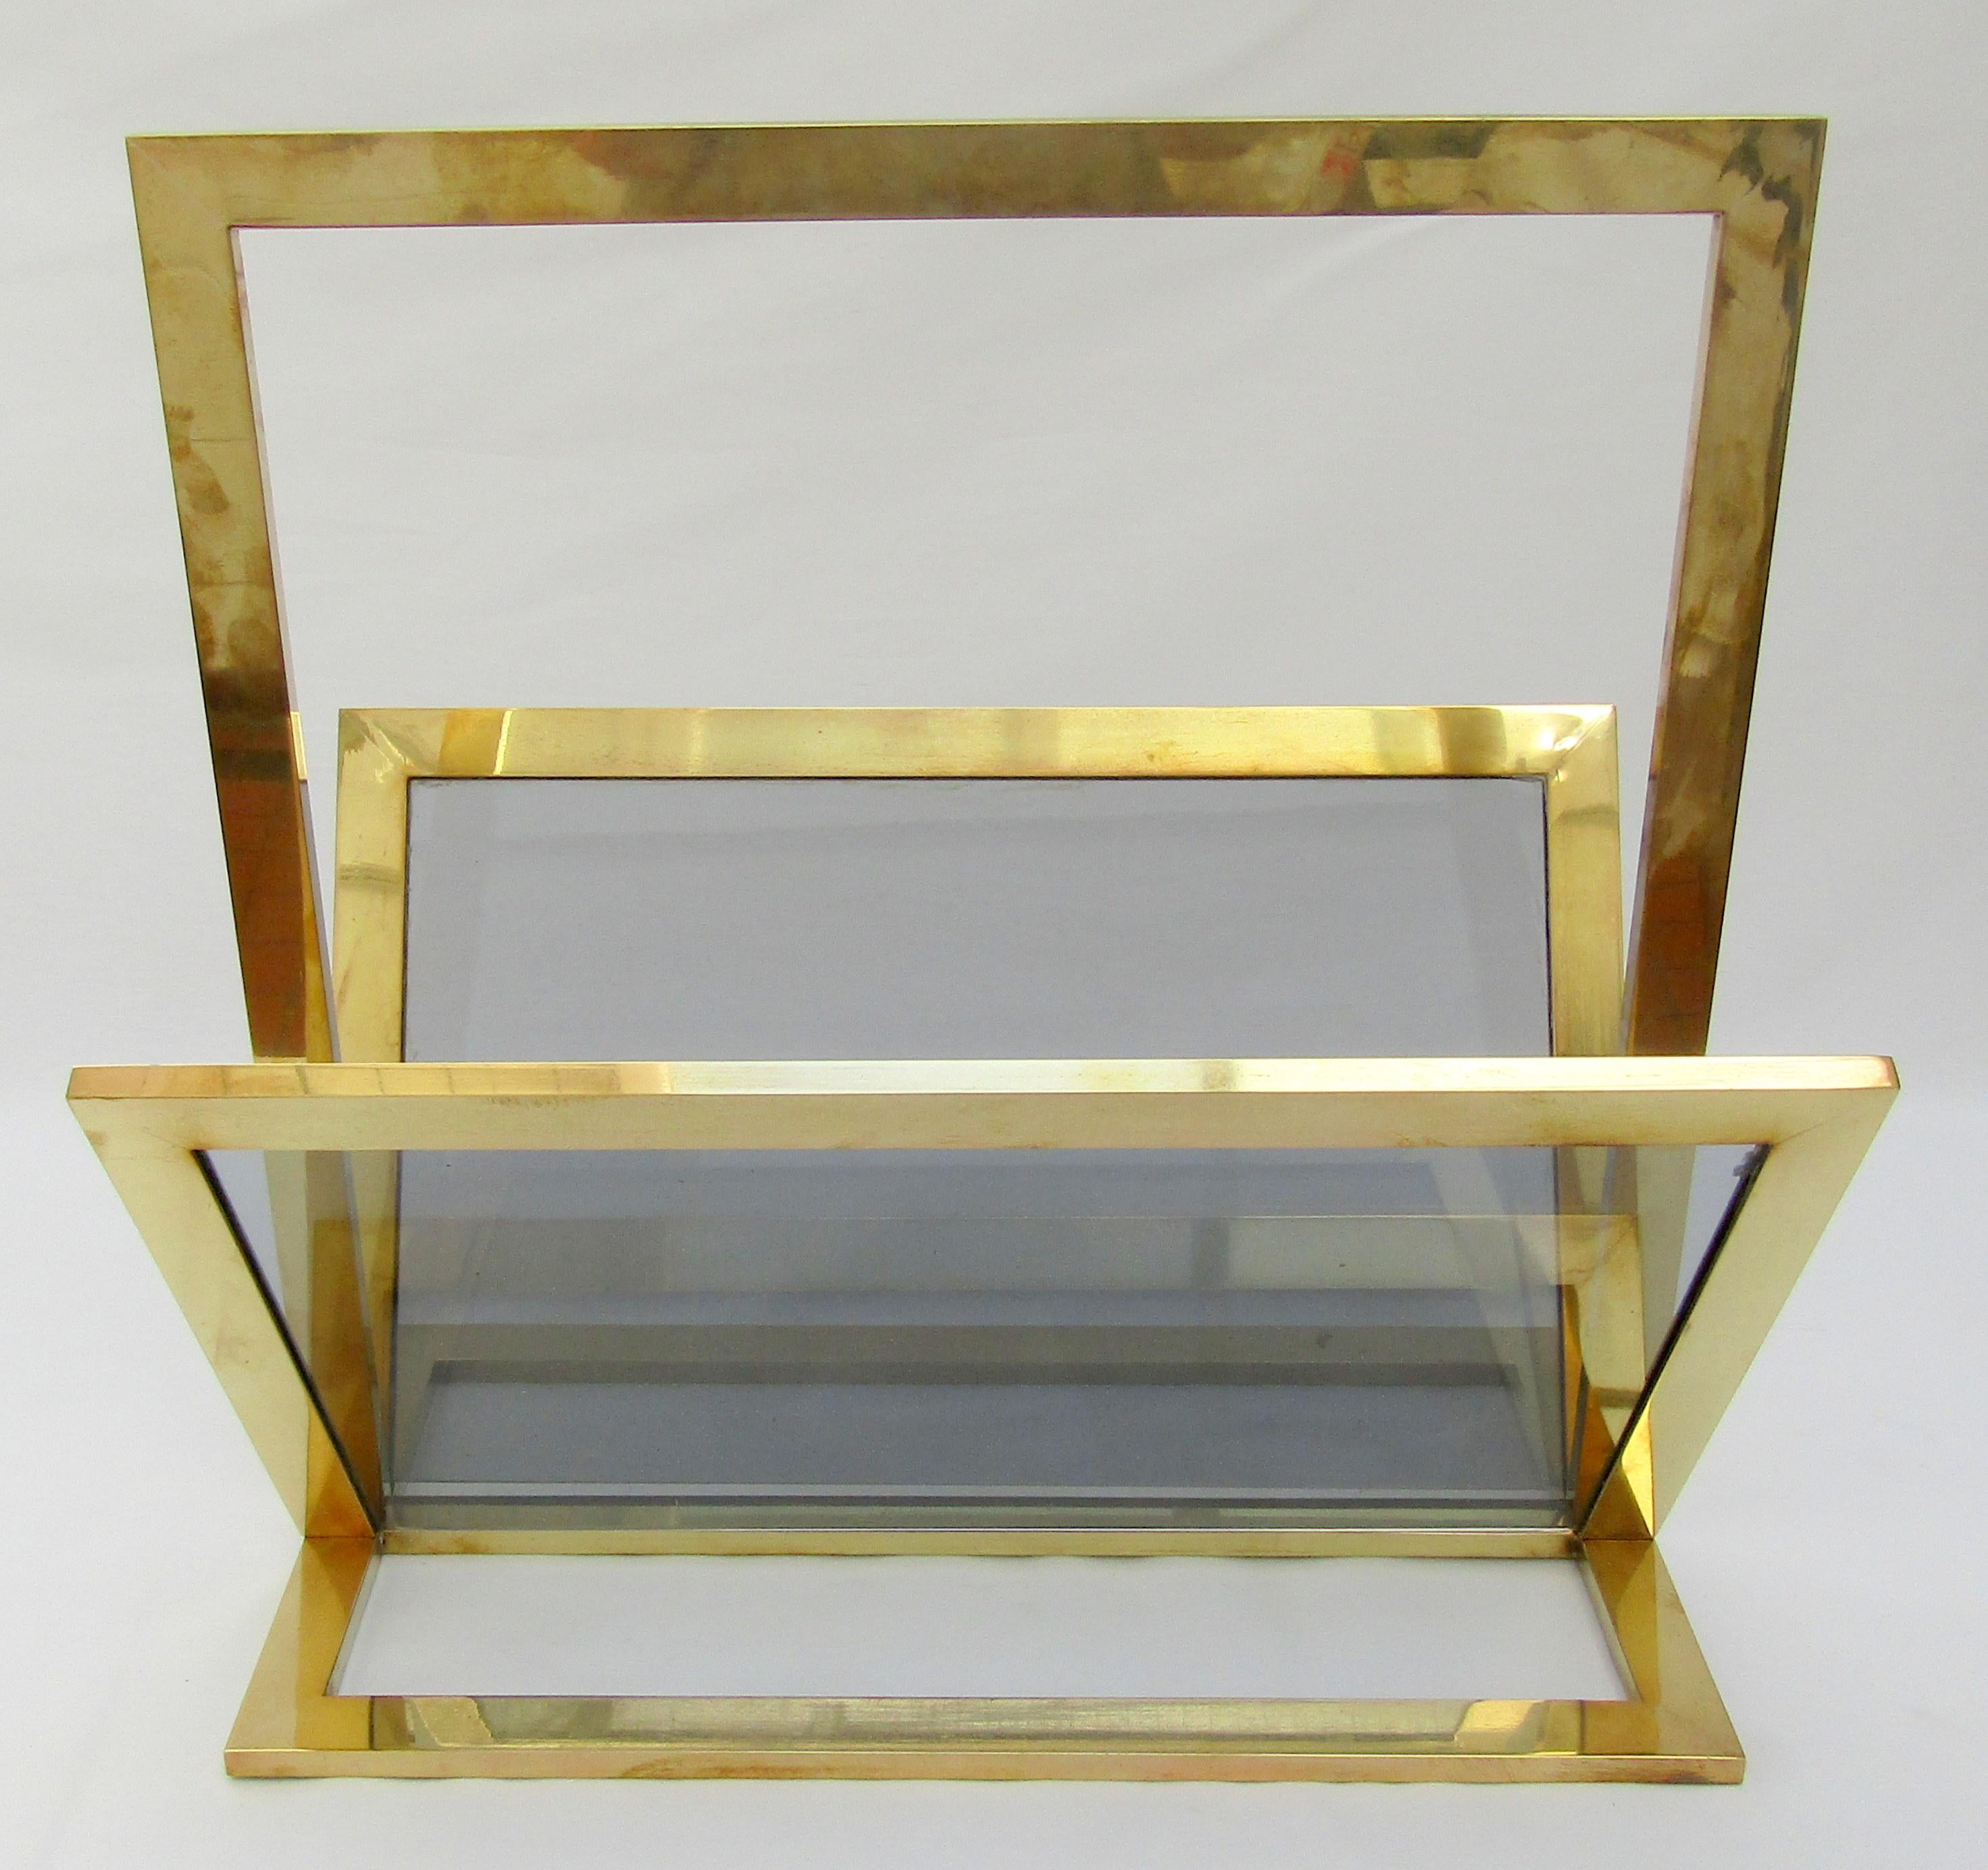 A large brass and smoked glass magazine rack
Italian, circa 1970

Measures: Height 18 in / 46 cm
Width 17 ¾ in / 45 cm
Depth 12 in / 30.5 cm.